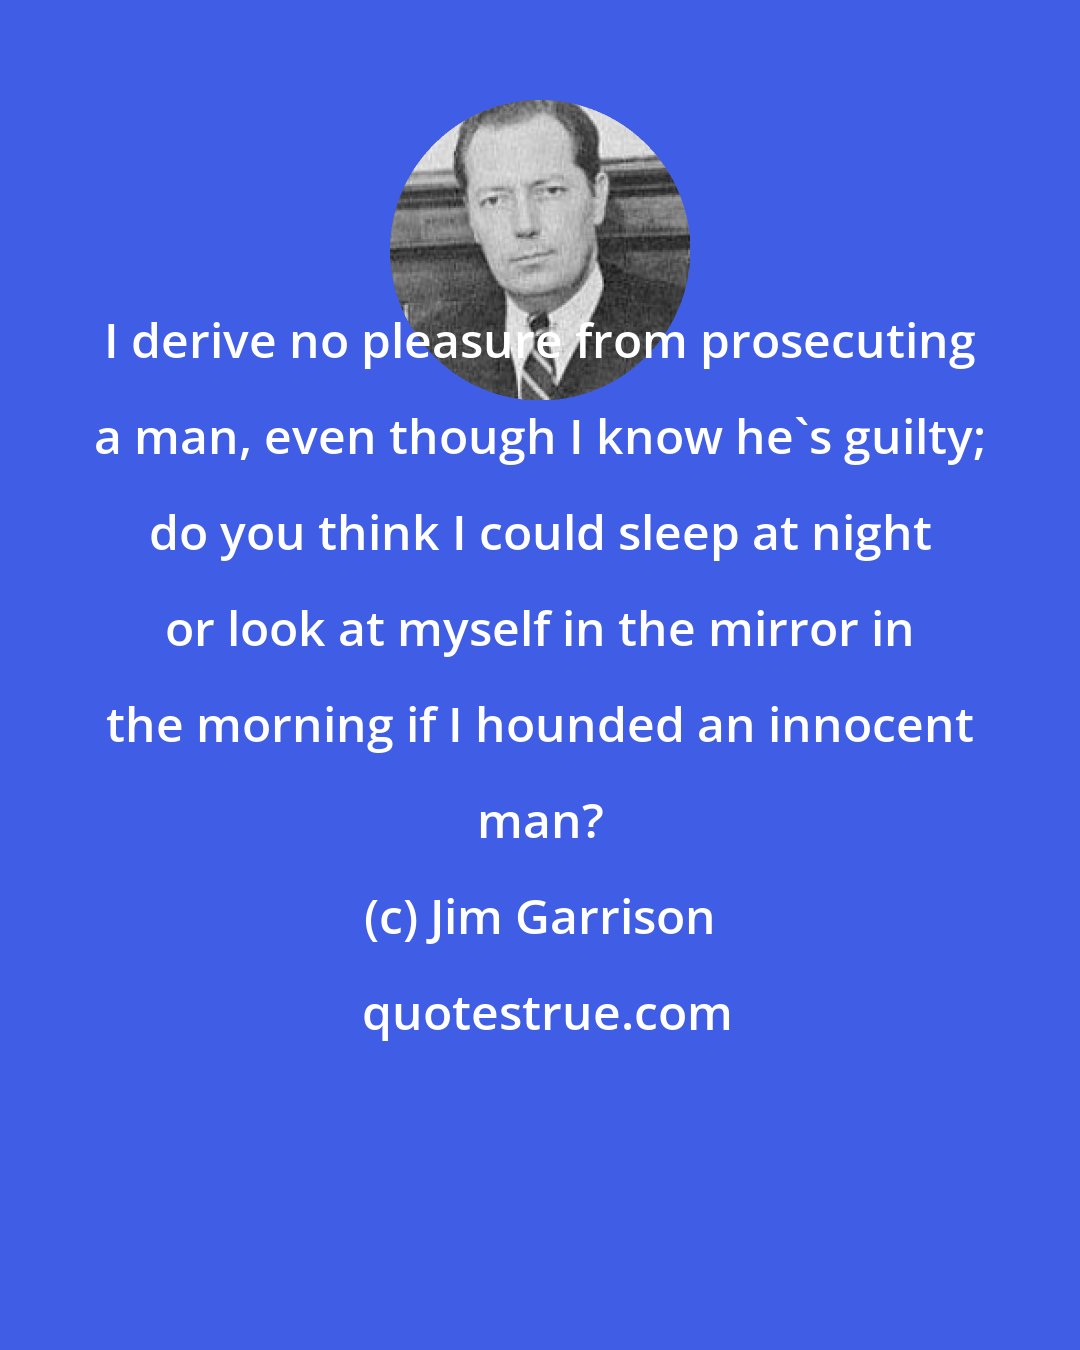 Jim Garrison: I derive no pleasure from prosecuting a man, even though I know he's guilty; do you think I could sleep at night or look at myself in the mirror in the morning if I hounded an innocent man?